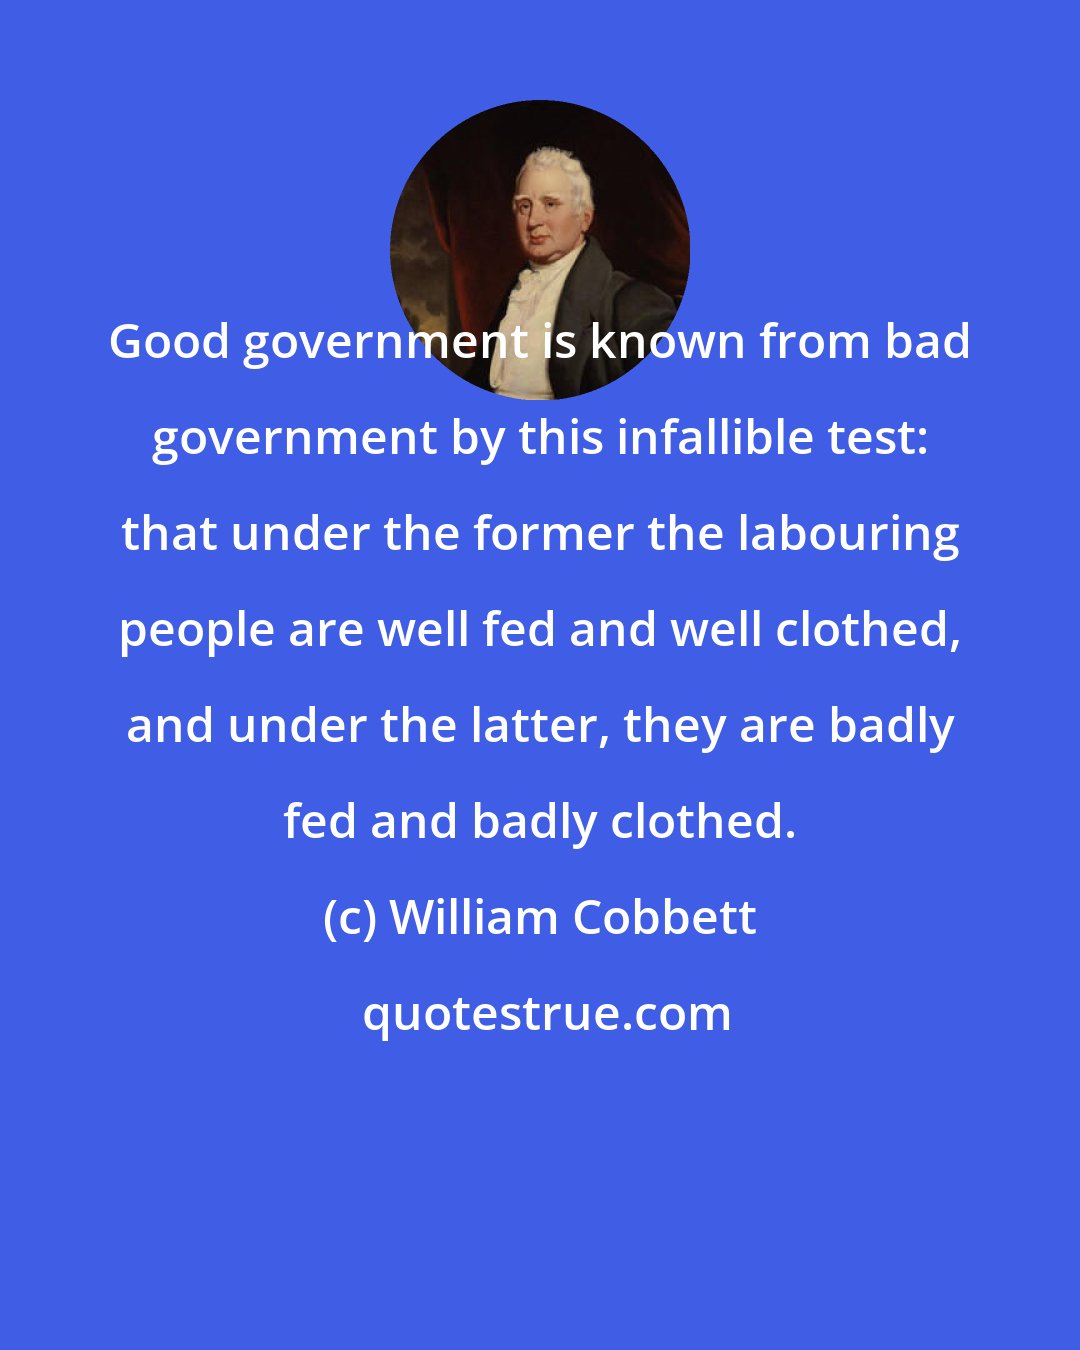 William Cobbett: Good government is known from bad government by this infallible test: that under the former the labouring people are well fed and well clothed, and under the latter, they are badly fed and badly clothed.